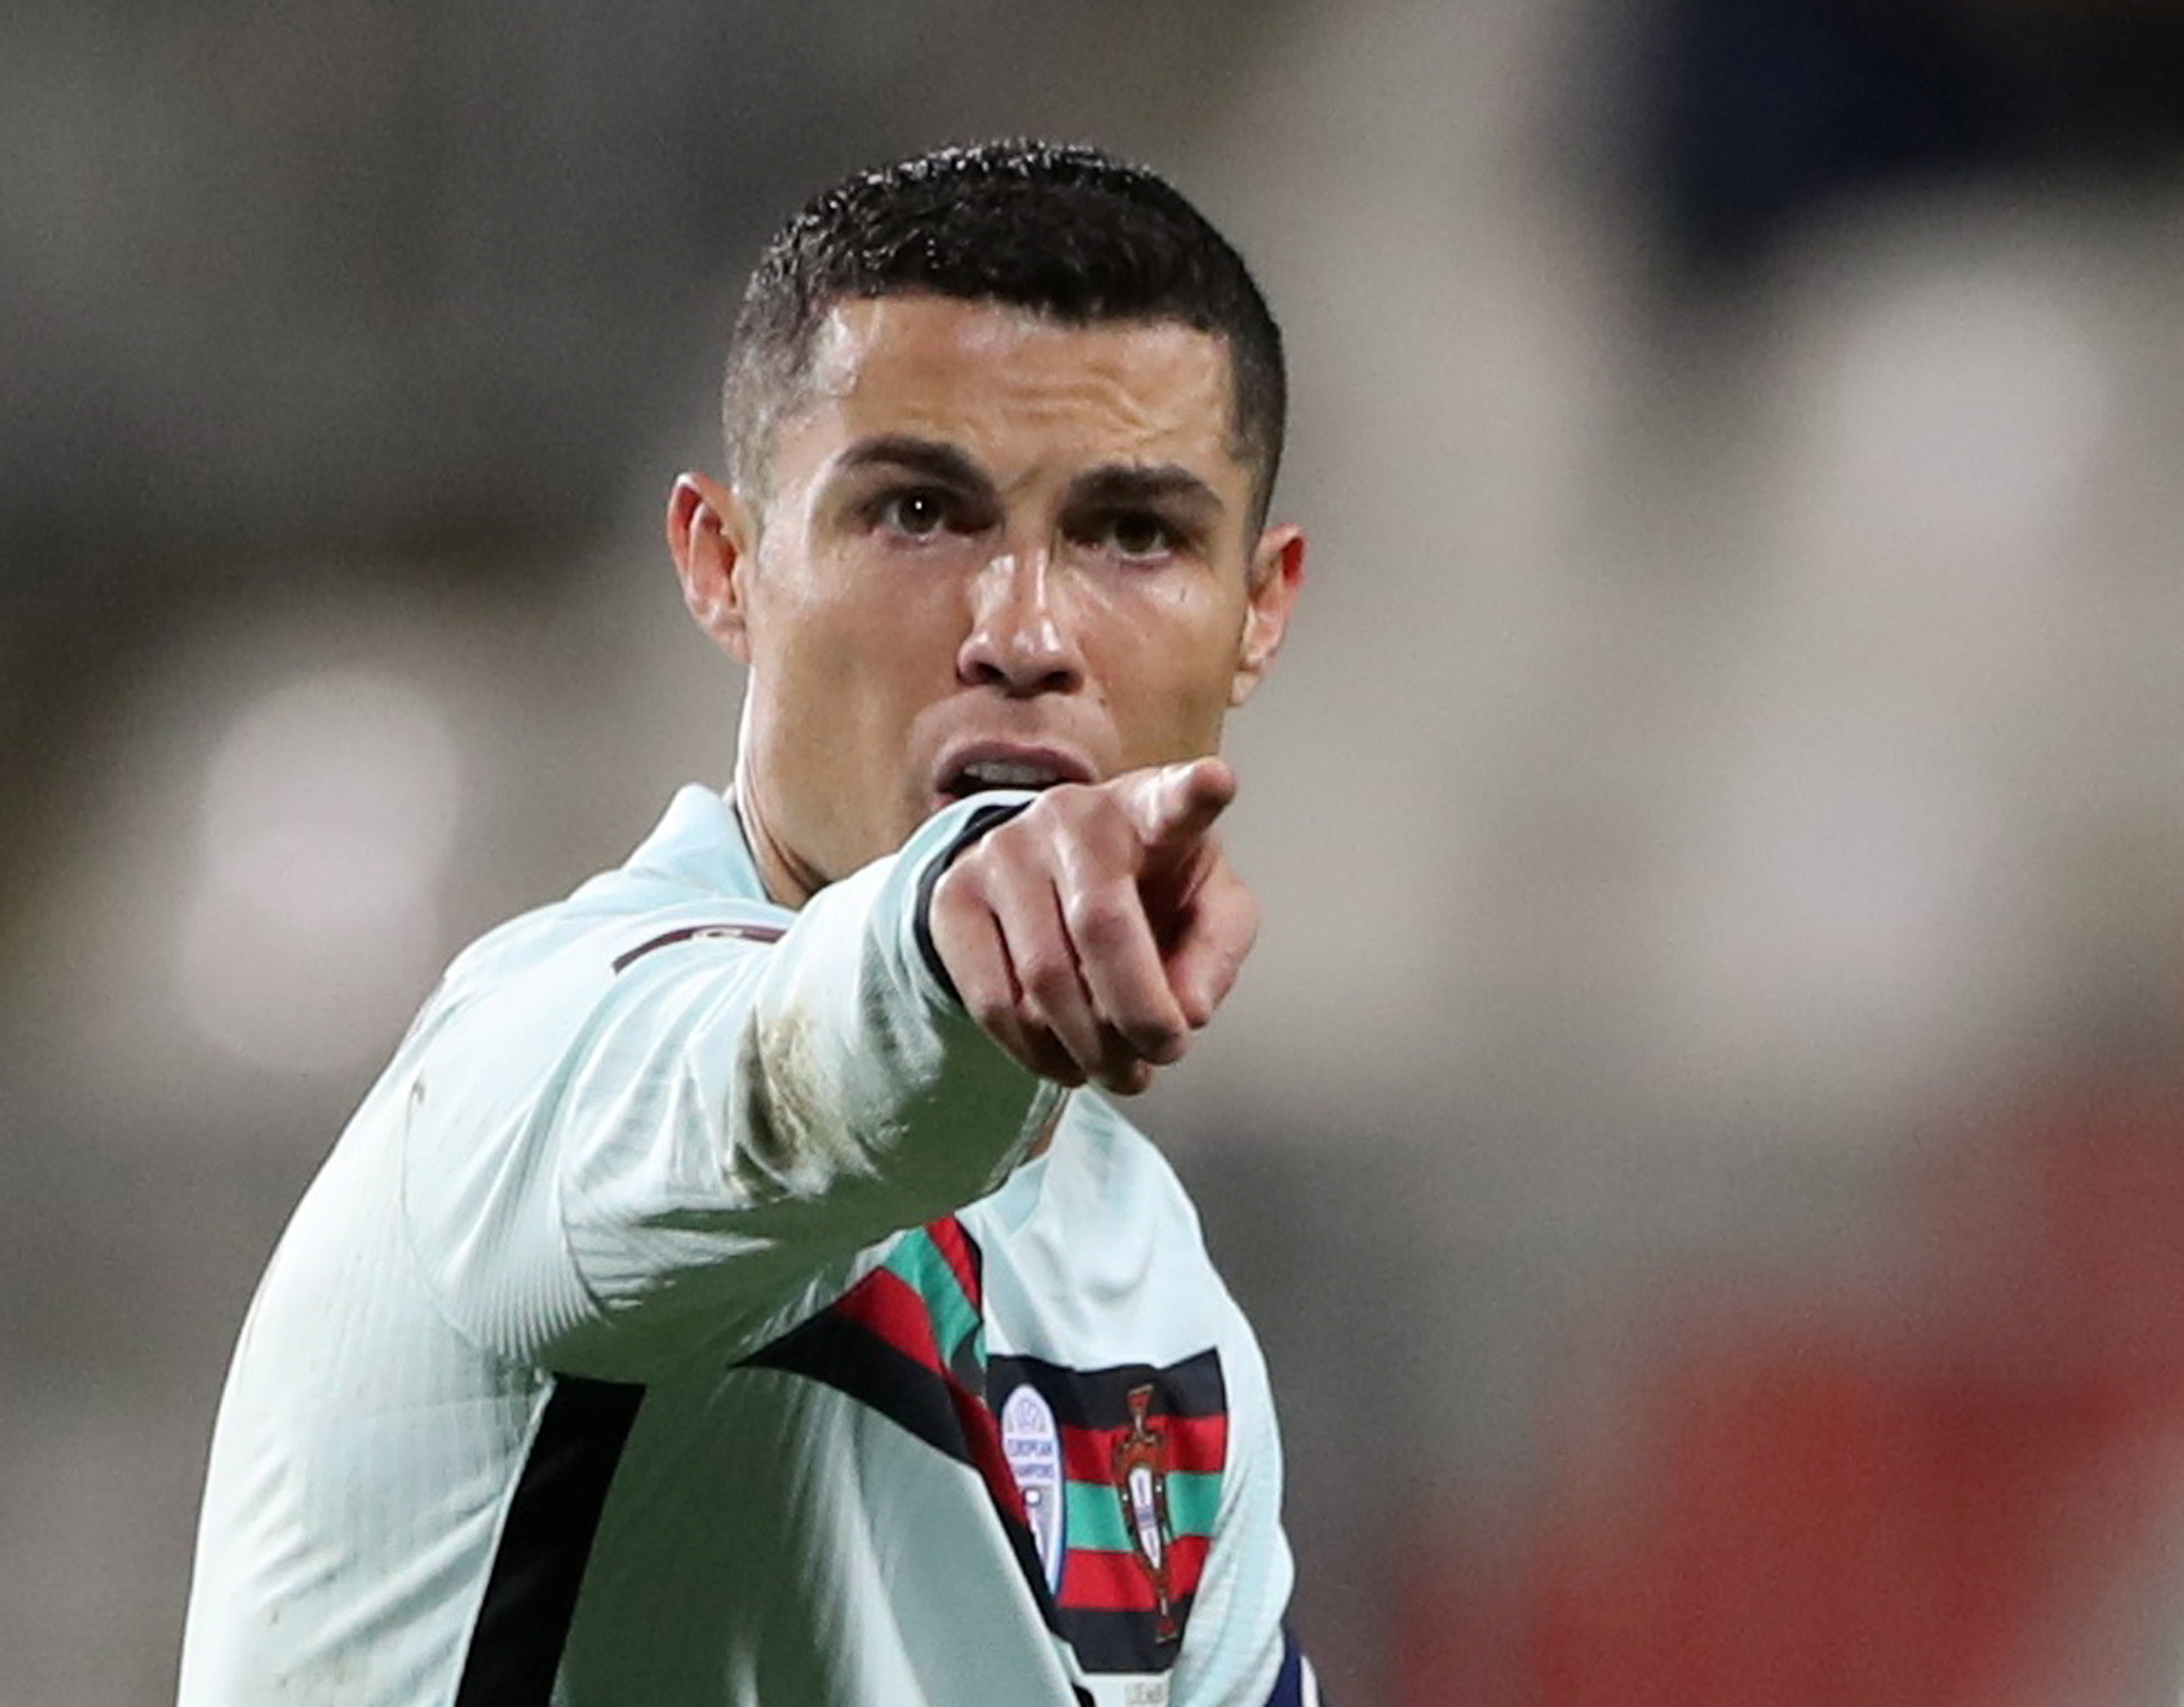 Soccer Football - World Cup Qualifiers Europe - Group A - Luxembourg v Portugal - Stade Josy Barthel, Luxembourg - March 30, 2021 Portugal's Cristiano Ronaldo reacts REUTERS/Pascal Rossignol/File Photo